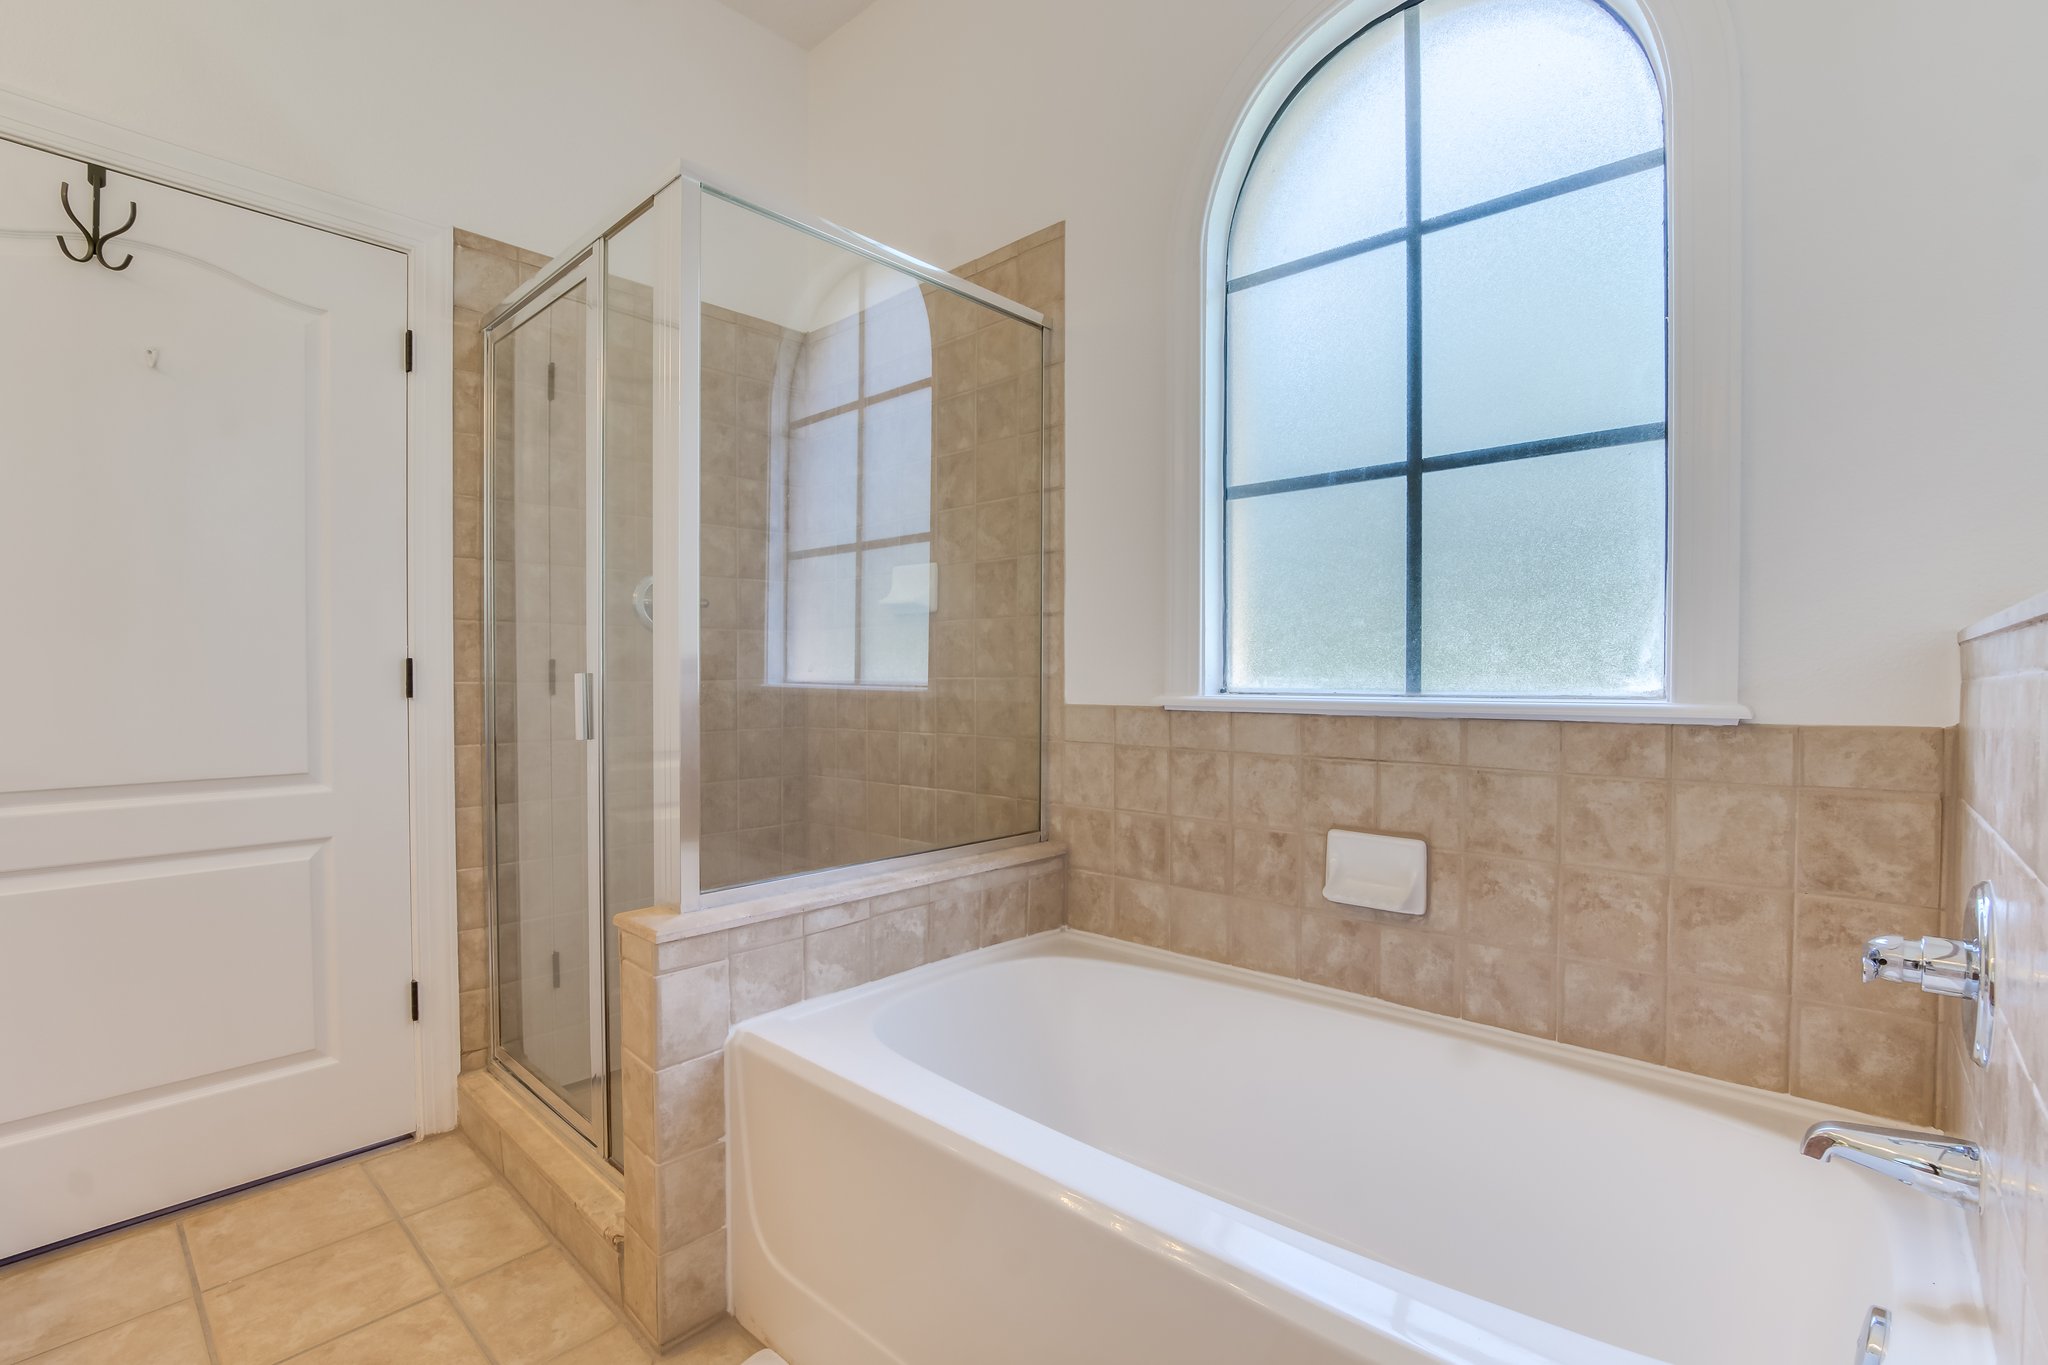 Main Master Bathroom with Soaking Tub and Separate Shower